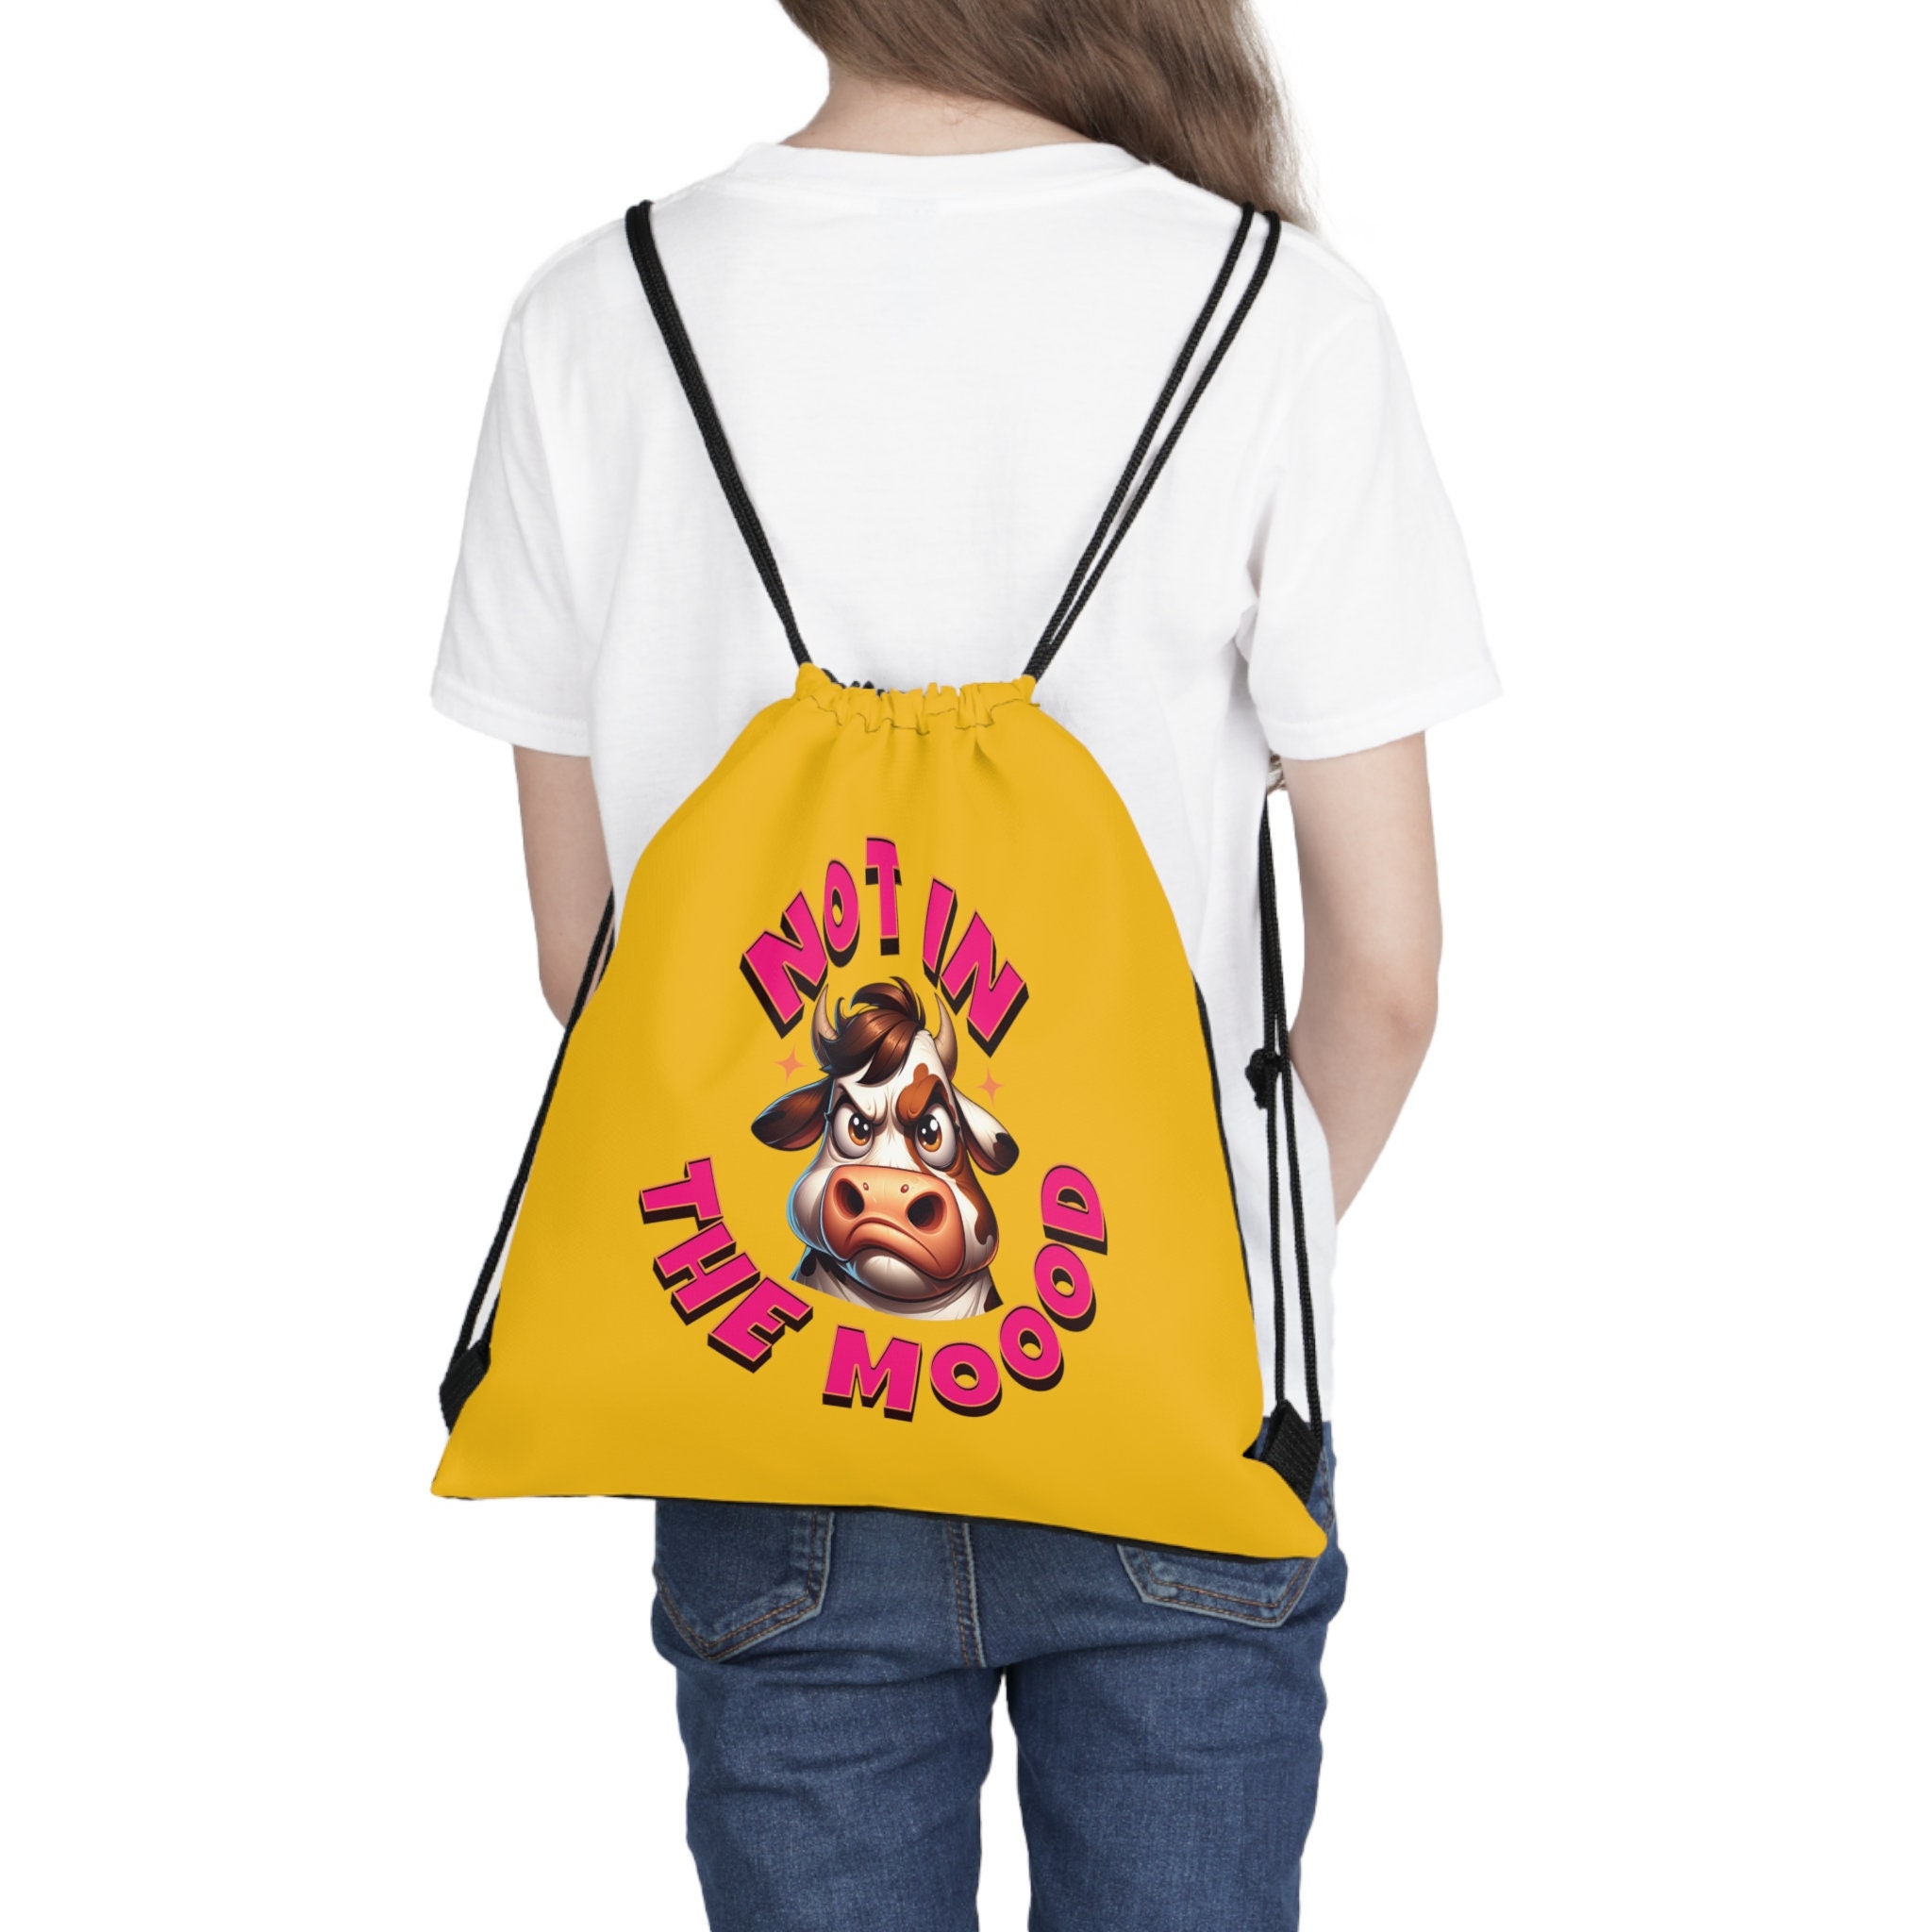 Discover Not In The Mood Outdoor Drawstring Bag